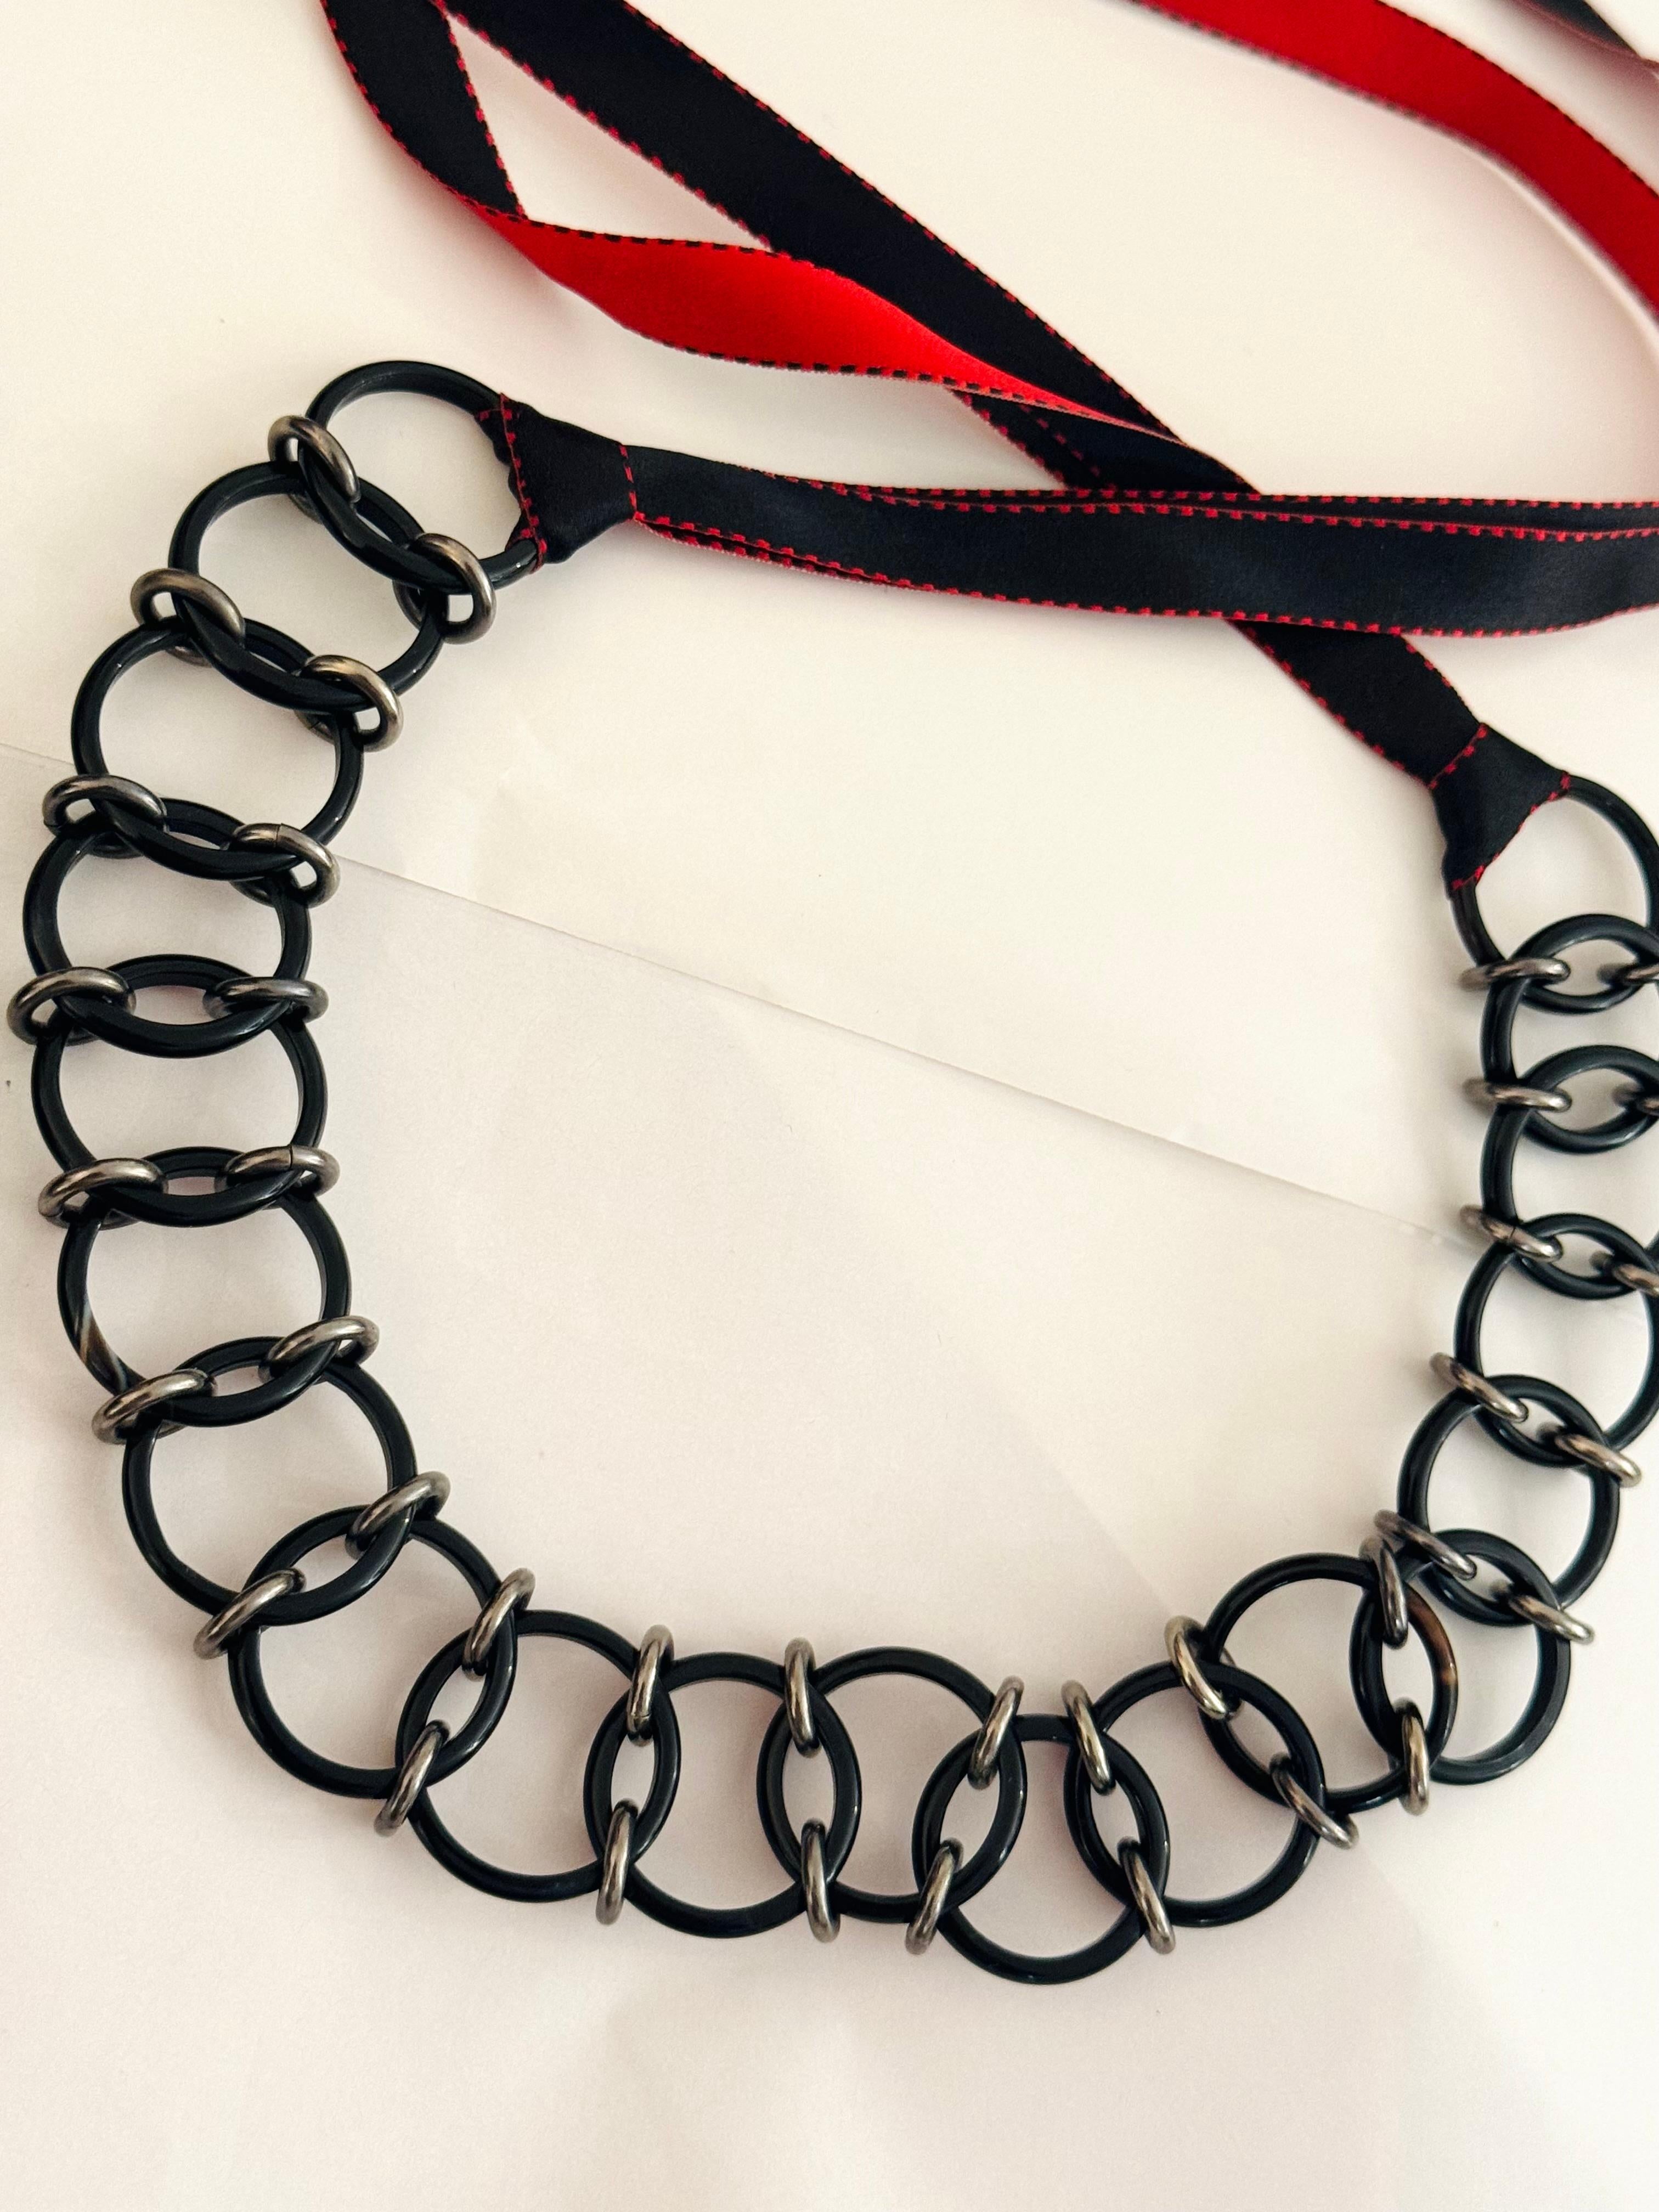 Women's or Men's Christian Dior by John Galliano 2003 Hardcore Choker Necklace  For Sale